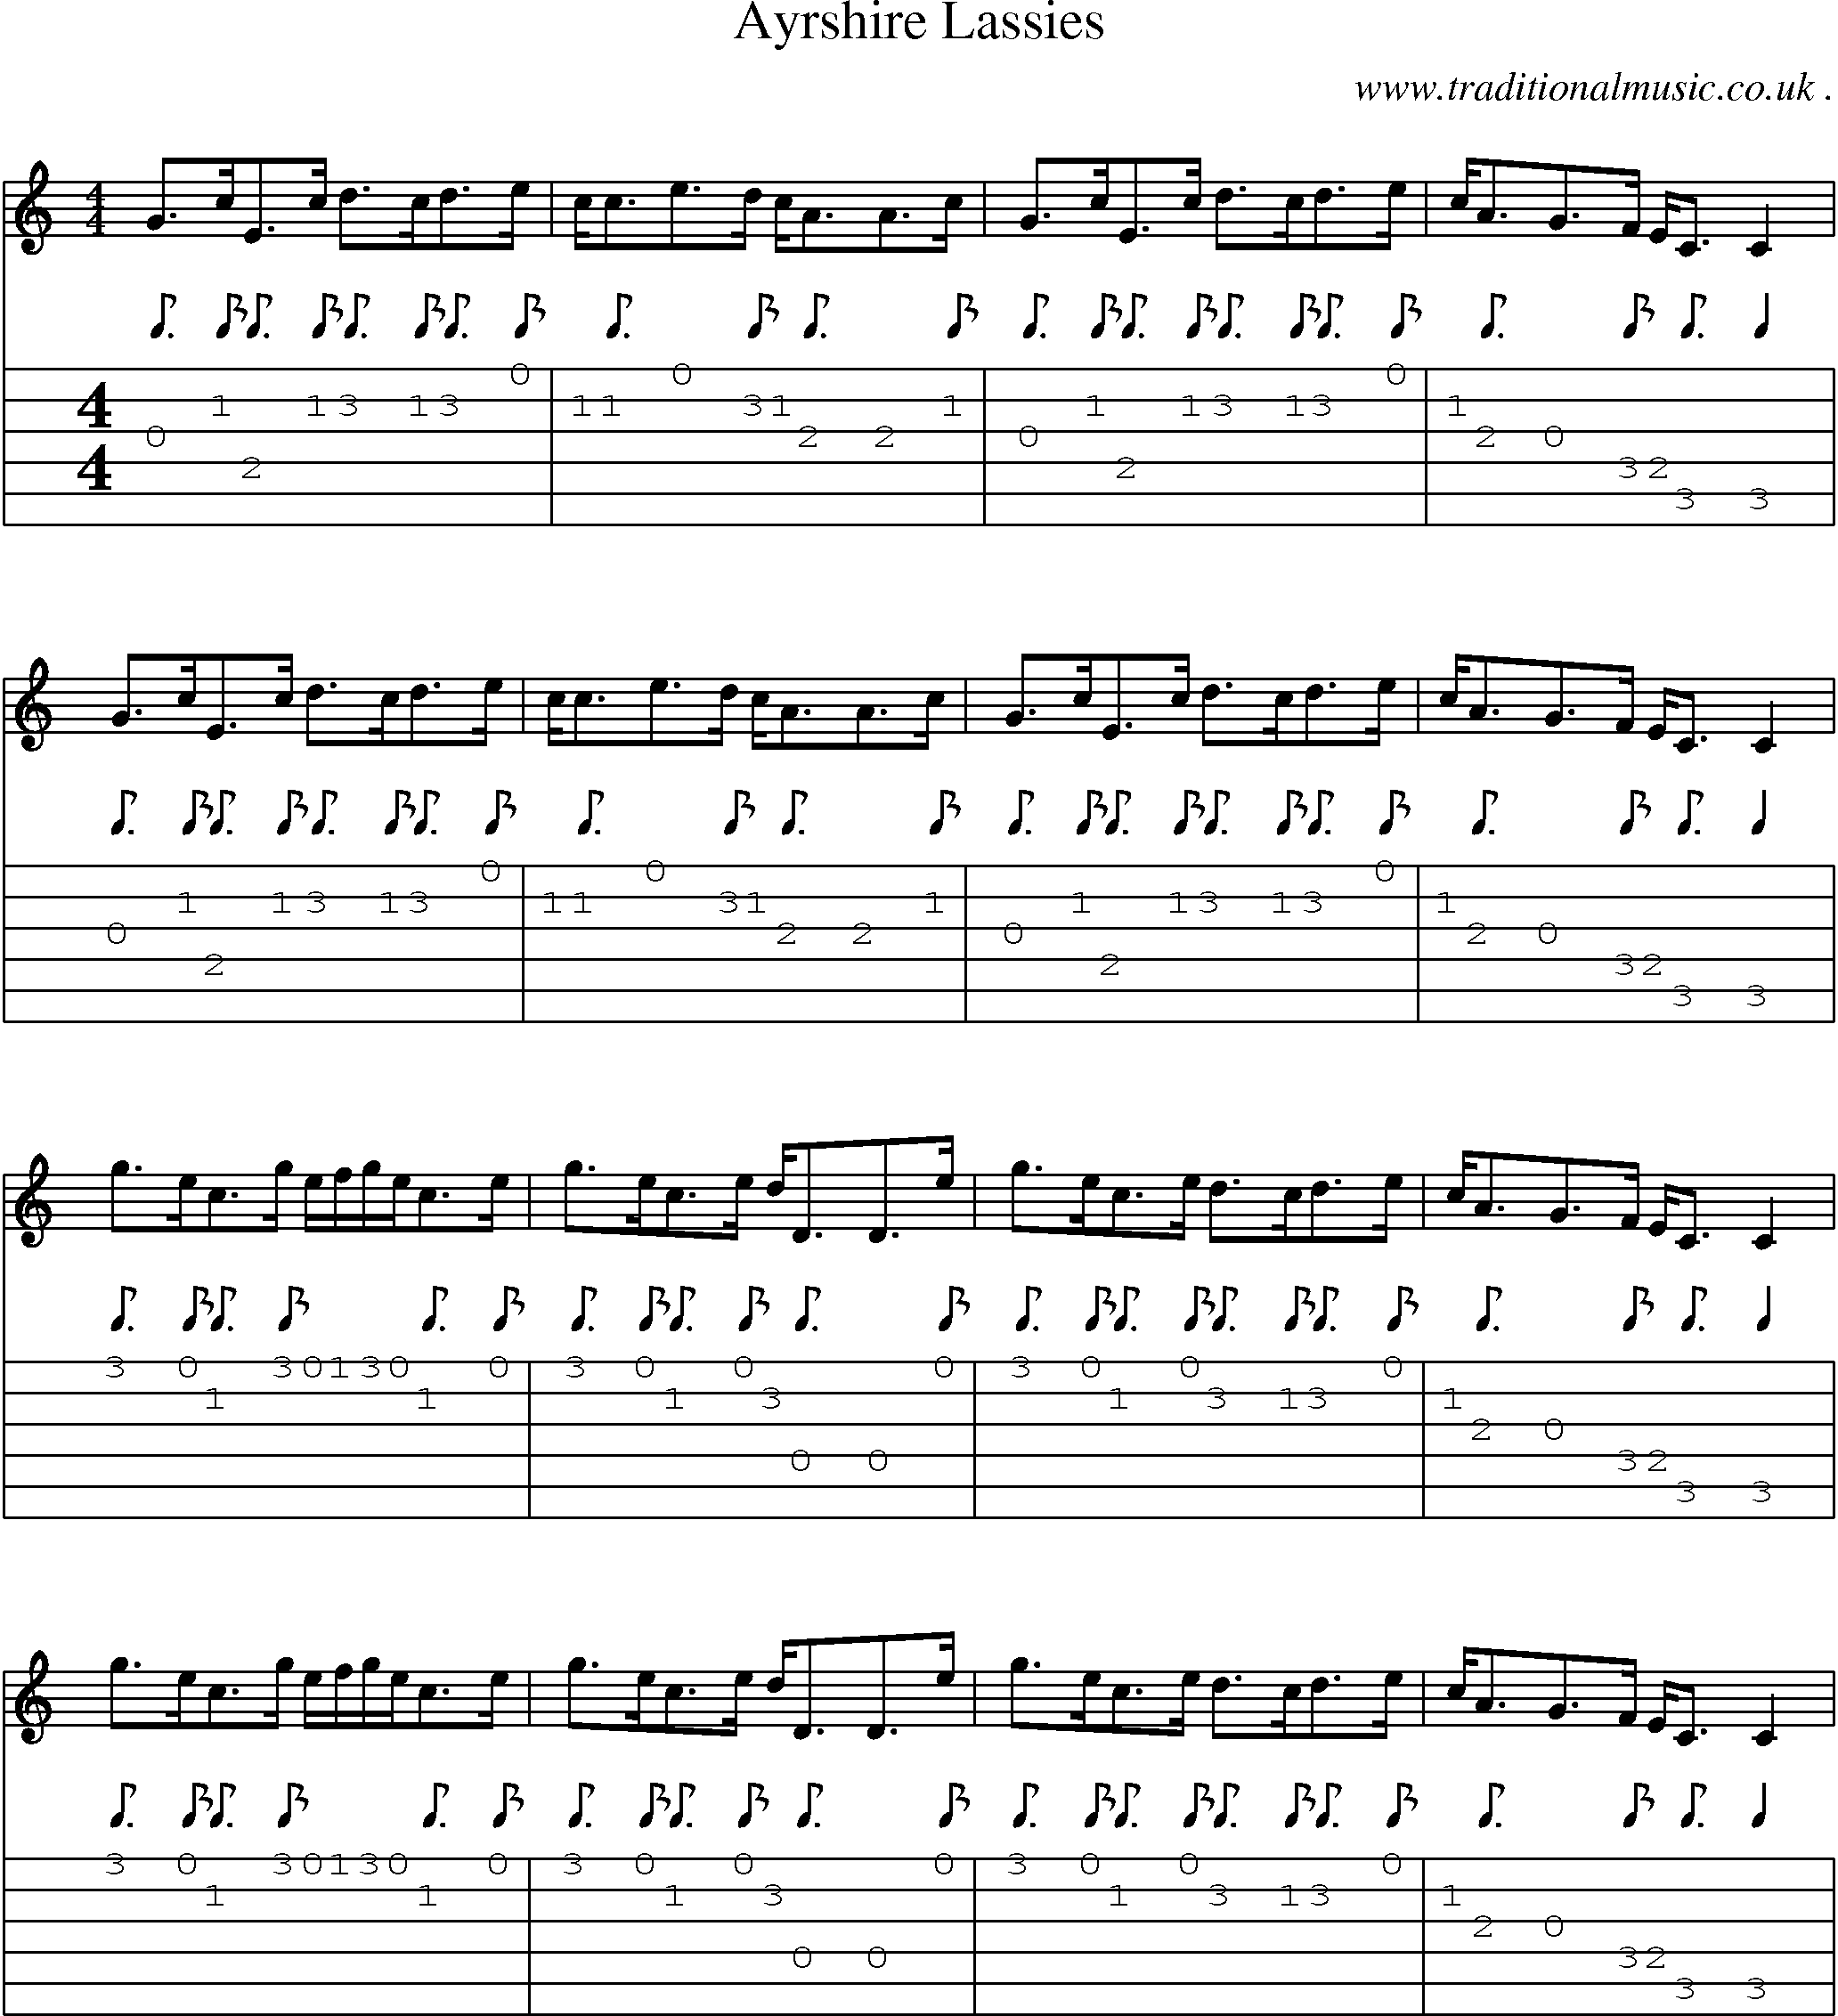 Sheet-music  score, Chords and Guitar Tabs for Ayrshire Lassies